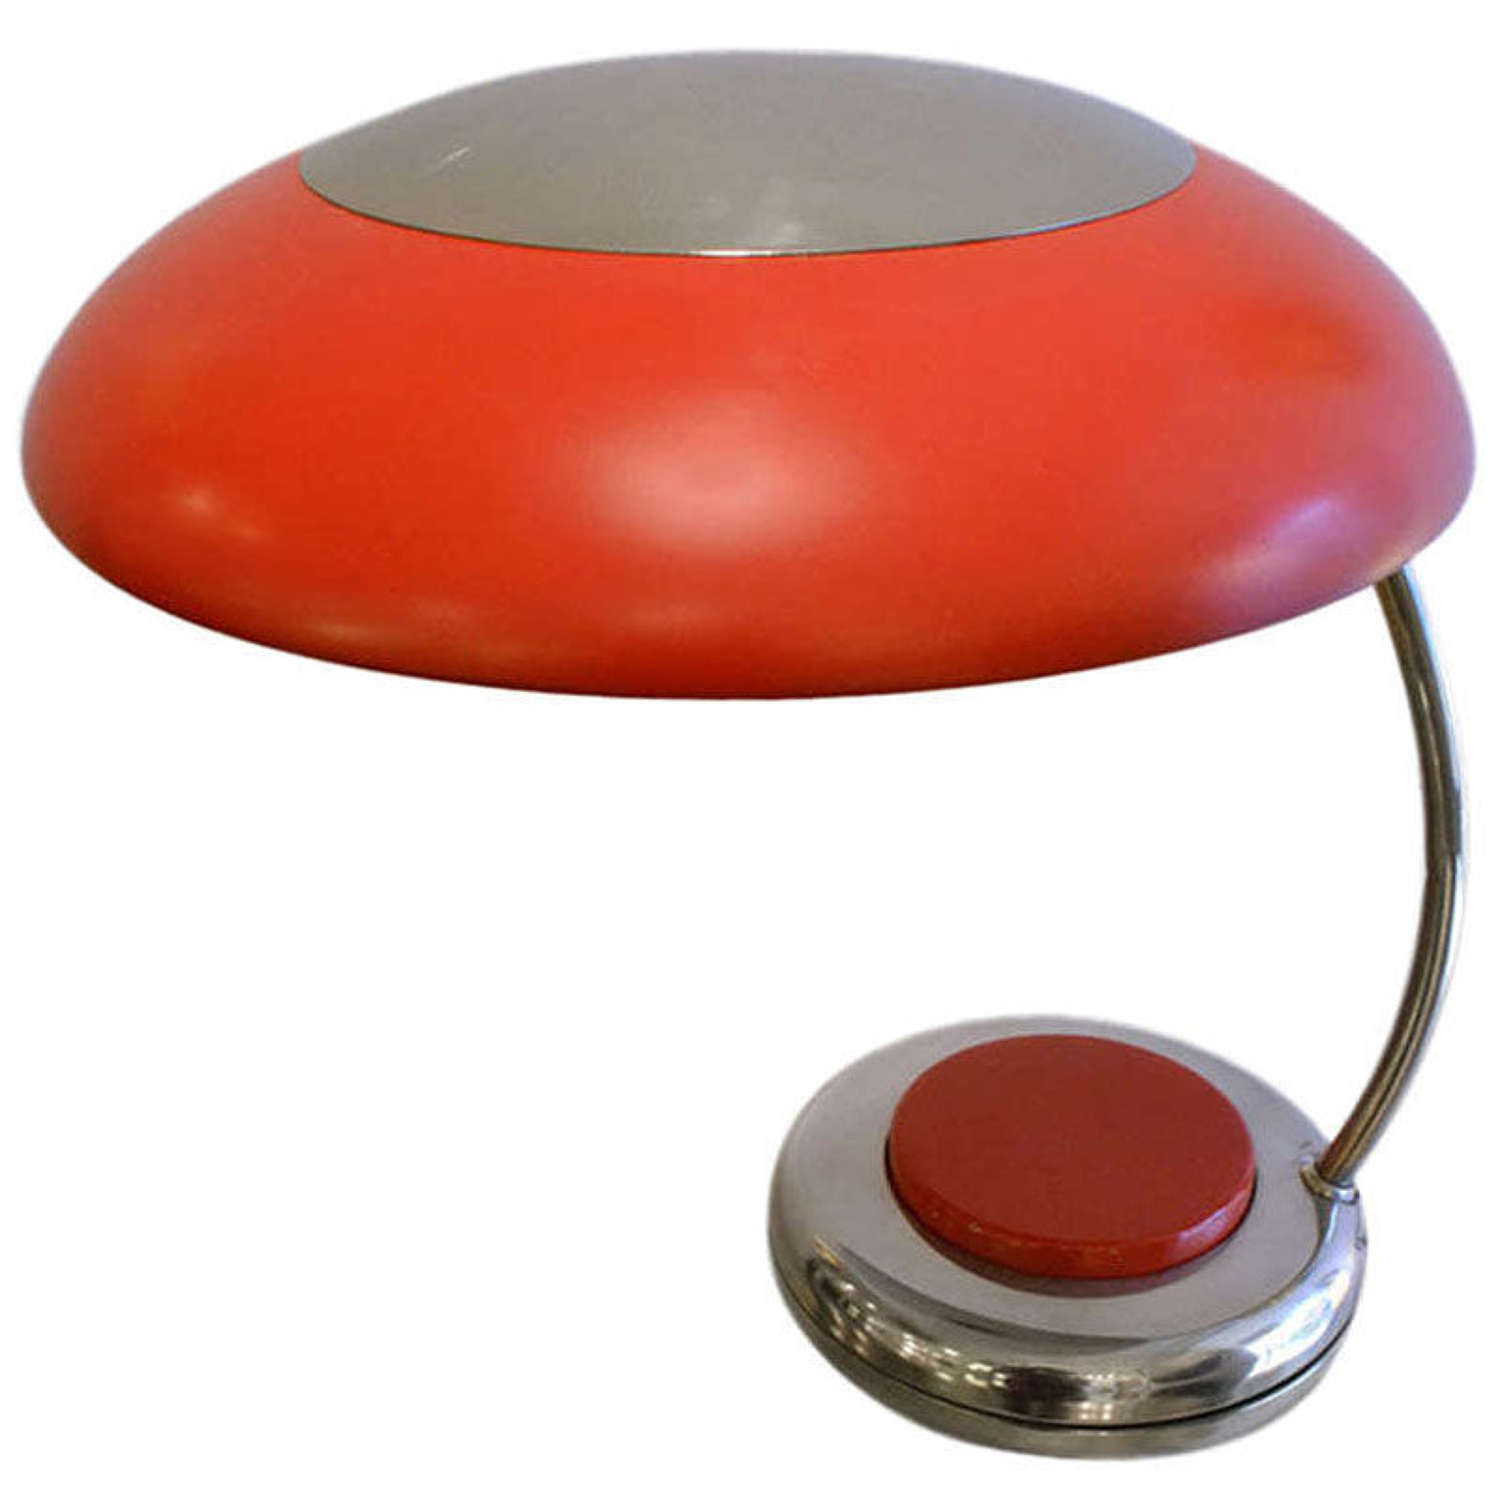 Mid-Century Modern Red Metal Desk or Table Lamp